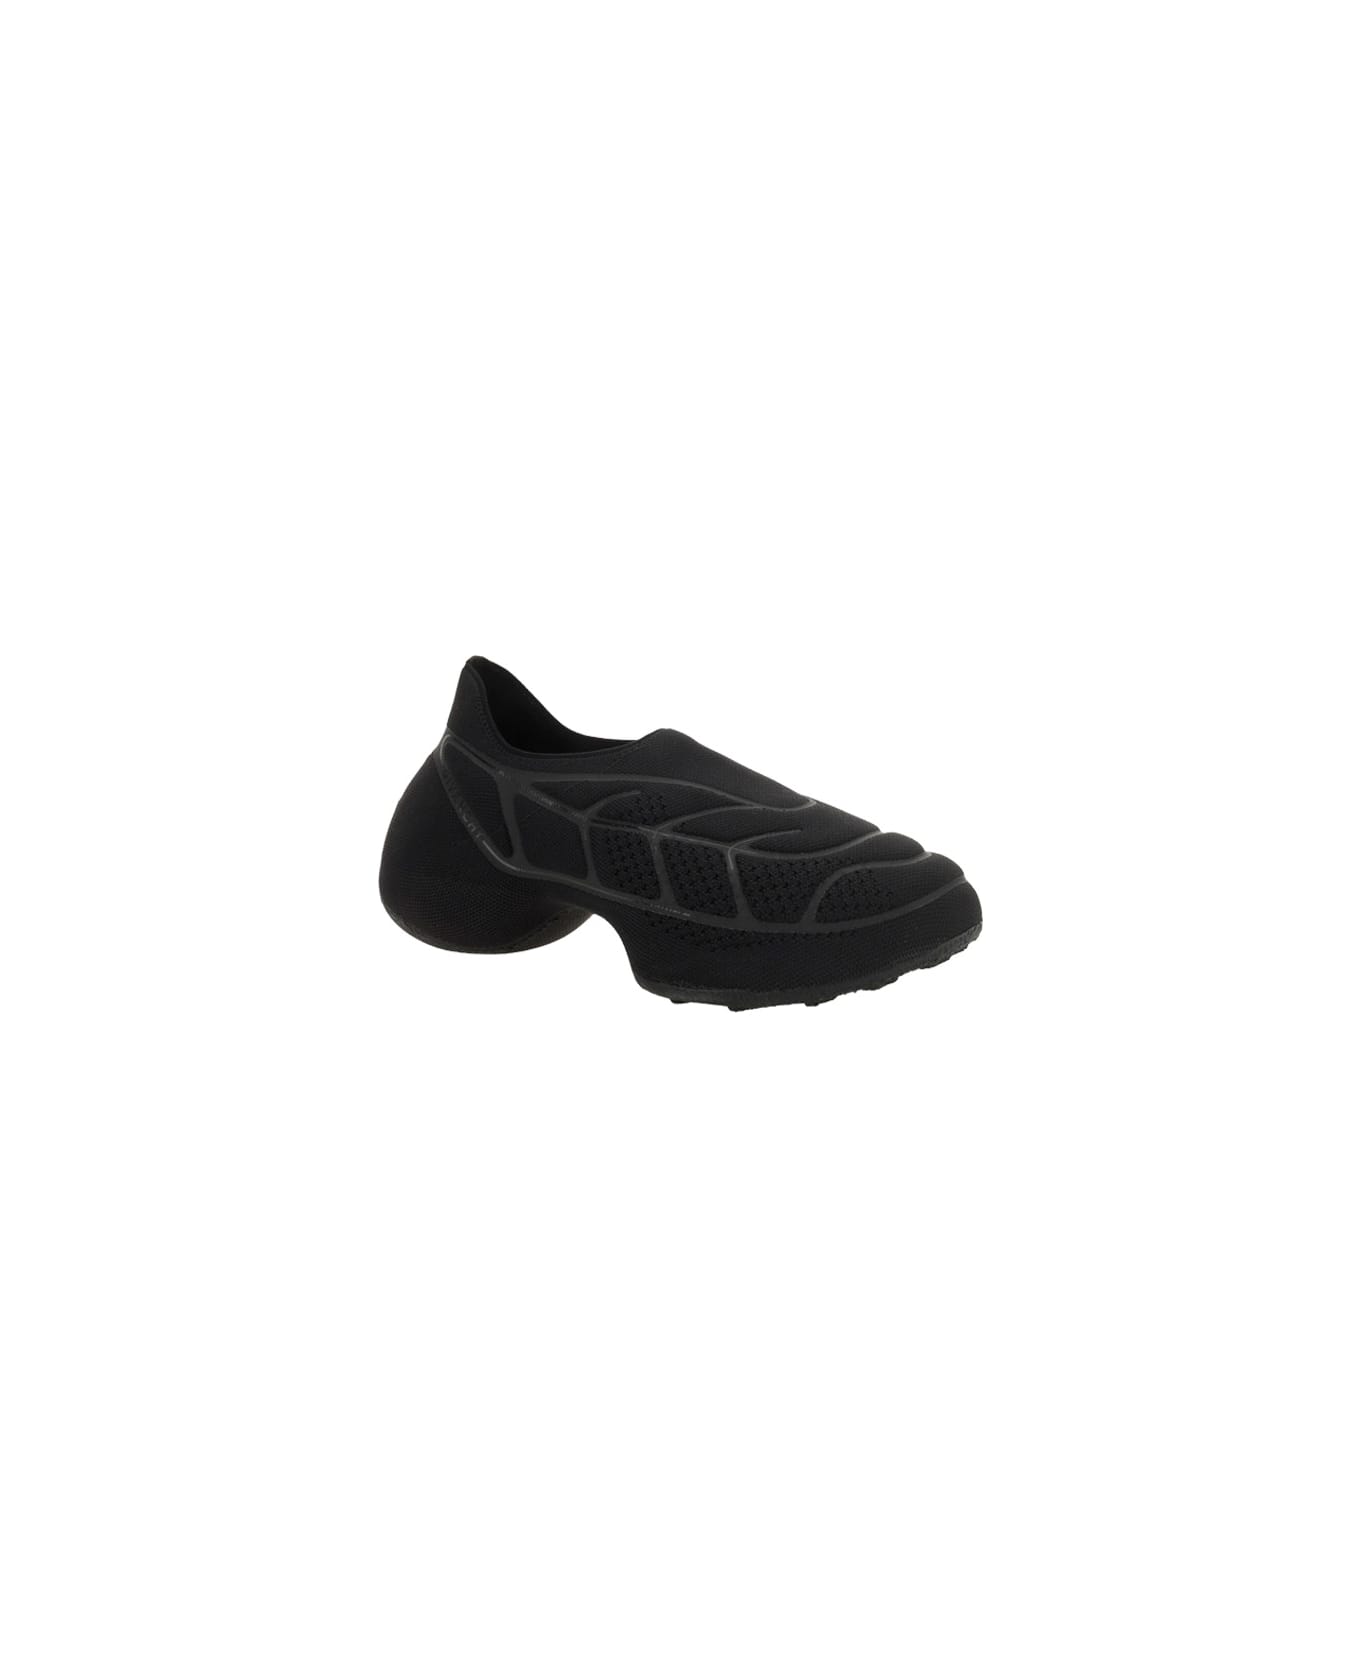 Givenchy Tk-360 Plus Sneakers - Black